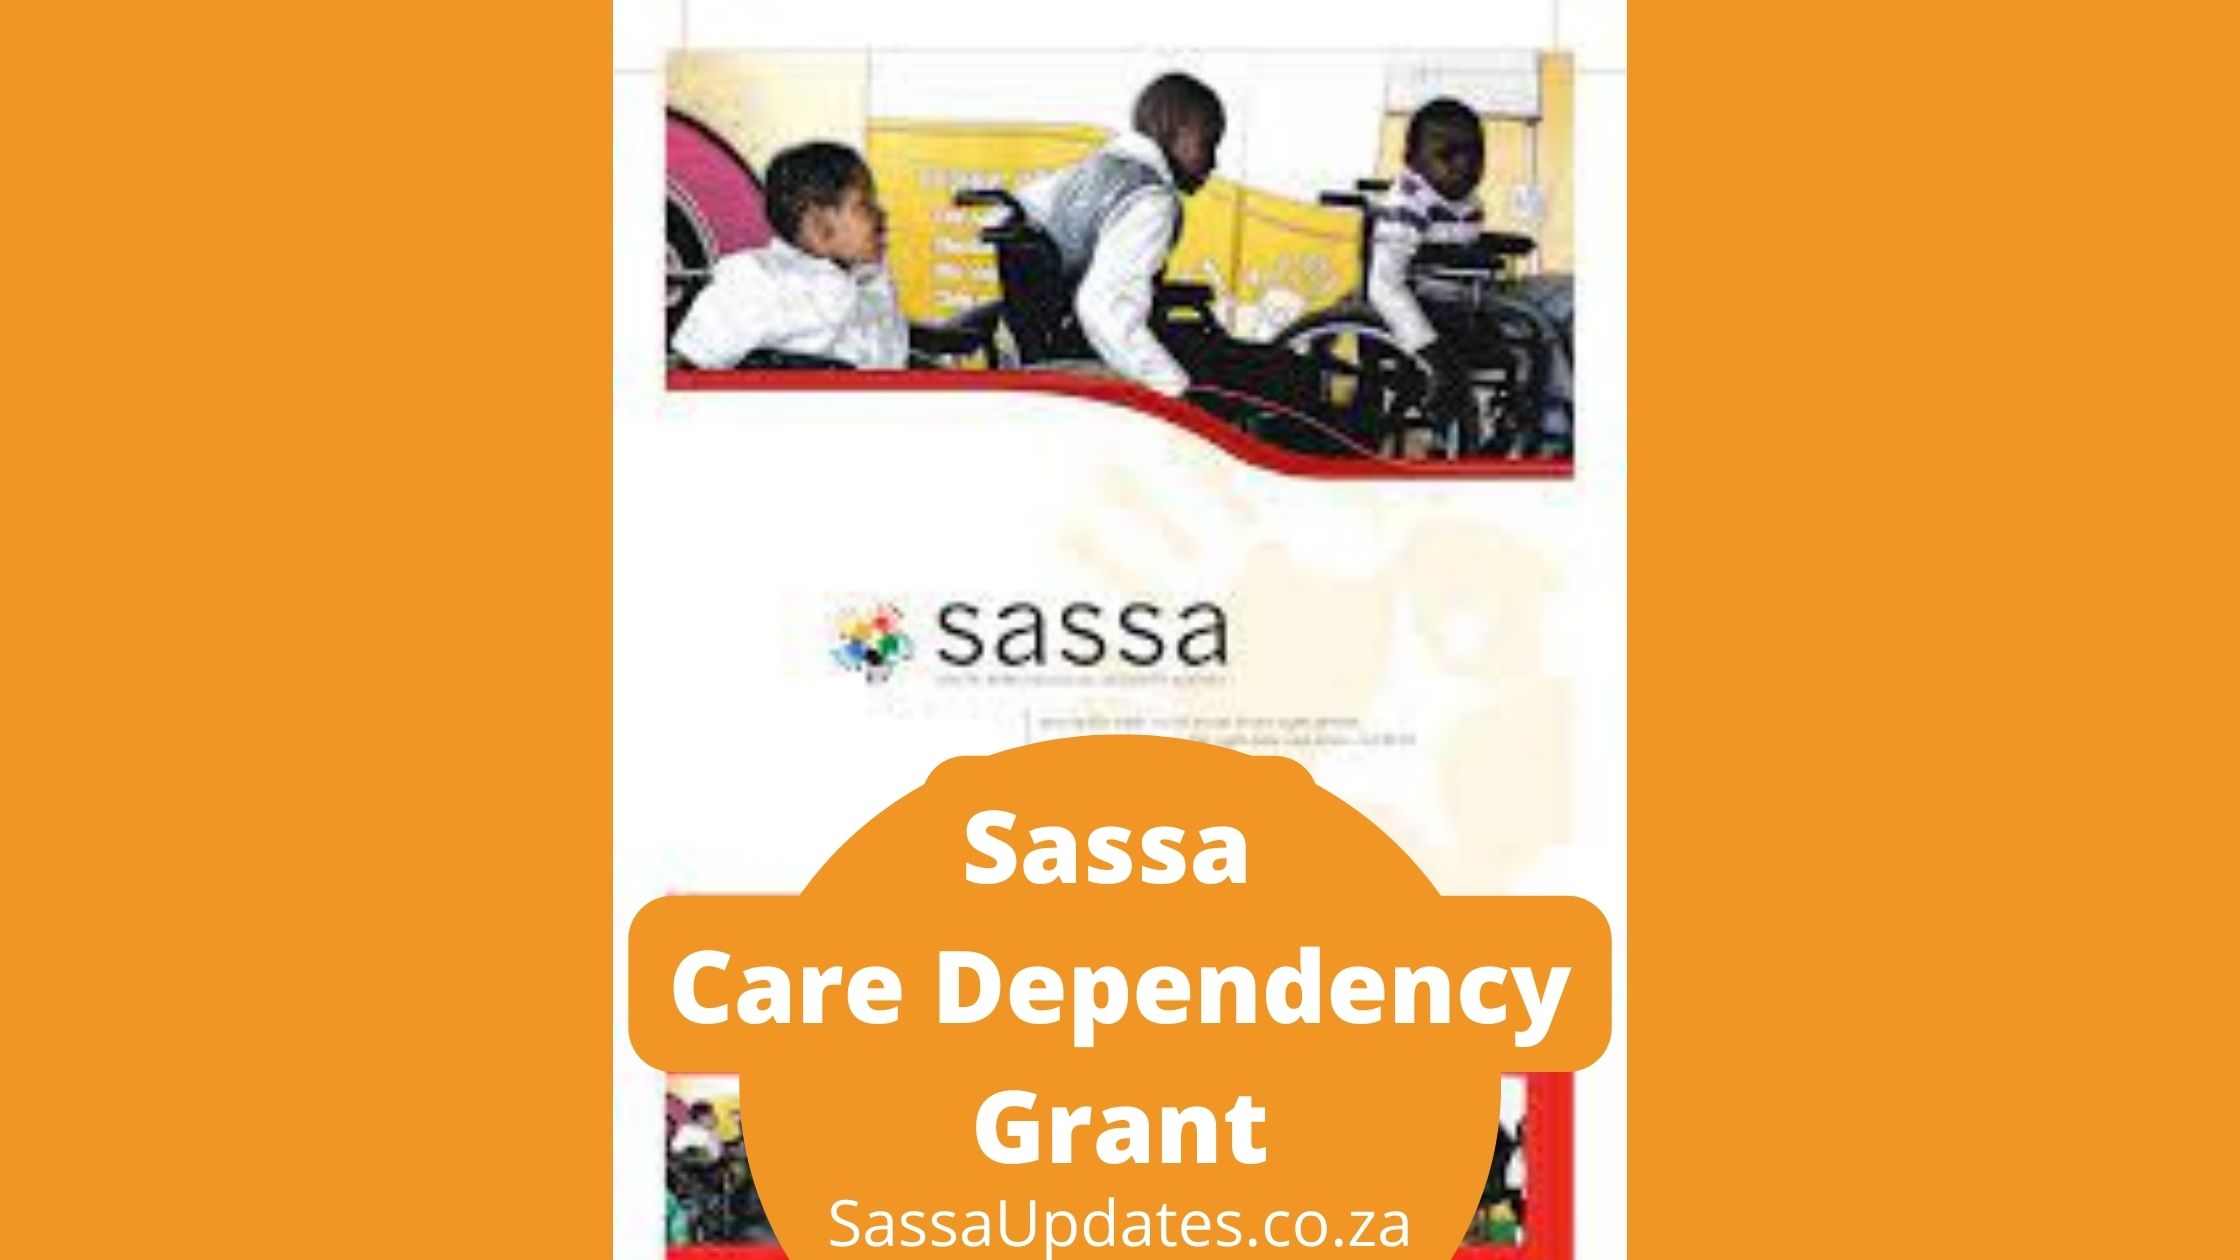 Care Dependency Grant